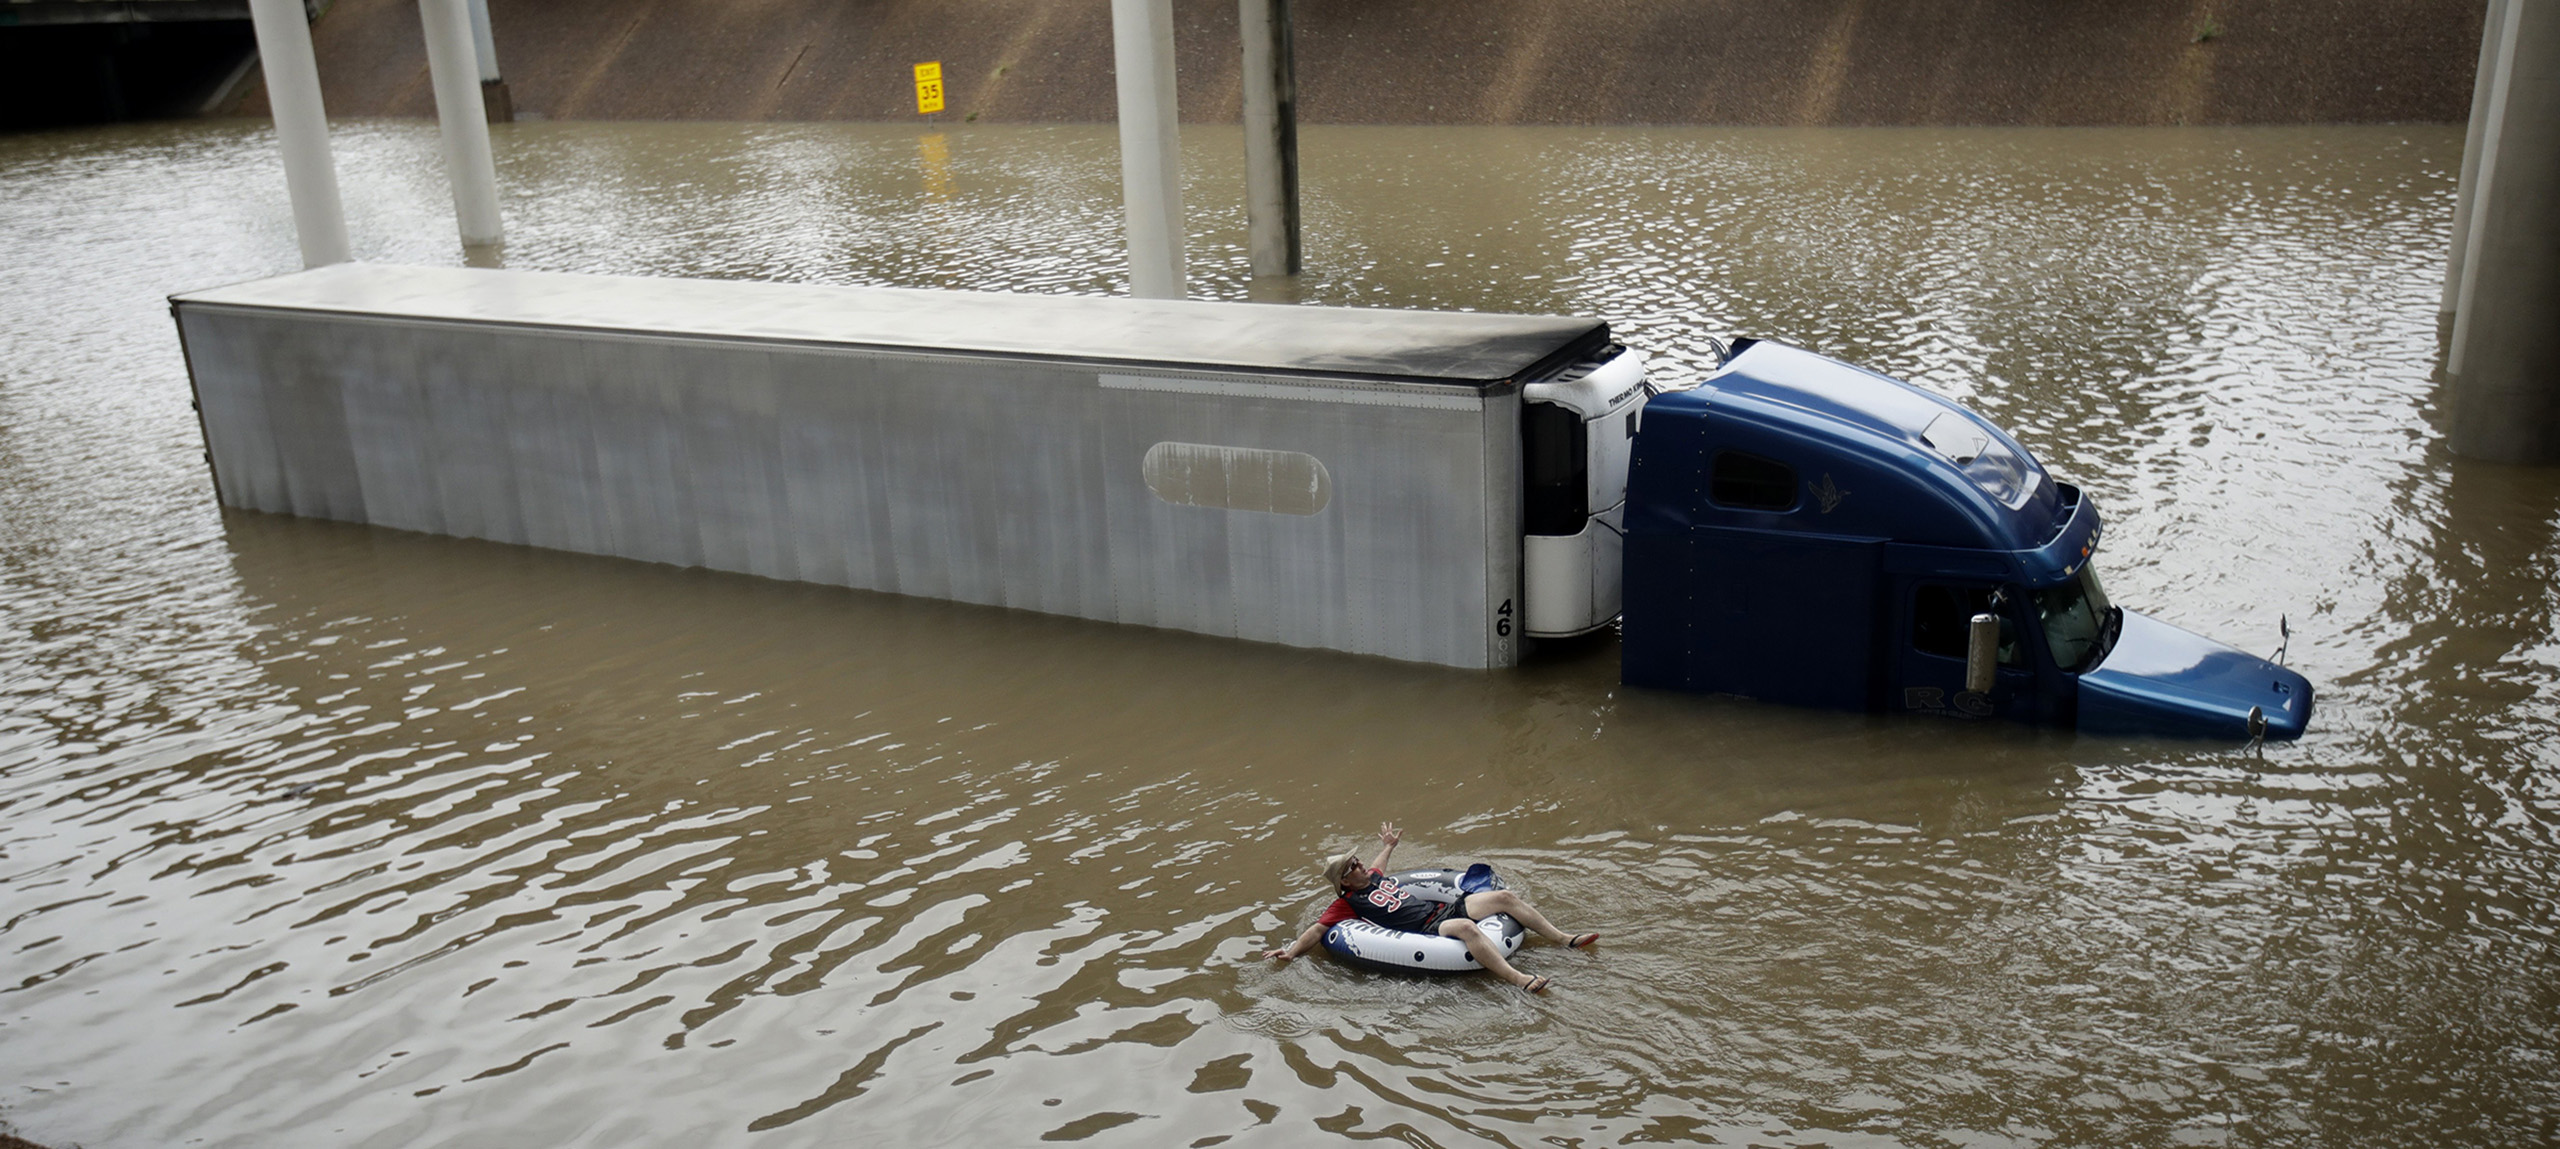 After helping the driver of the submerged truck get to safety, a man floats on the freeway flooded by Tropical Storm Harvey on Aug. 27, 2017, near downtown Houston.